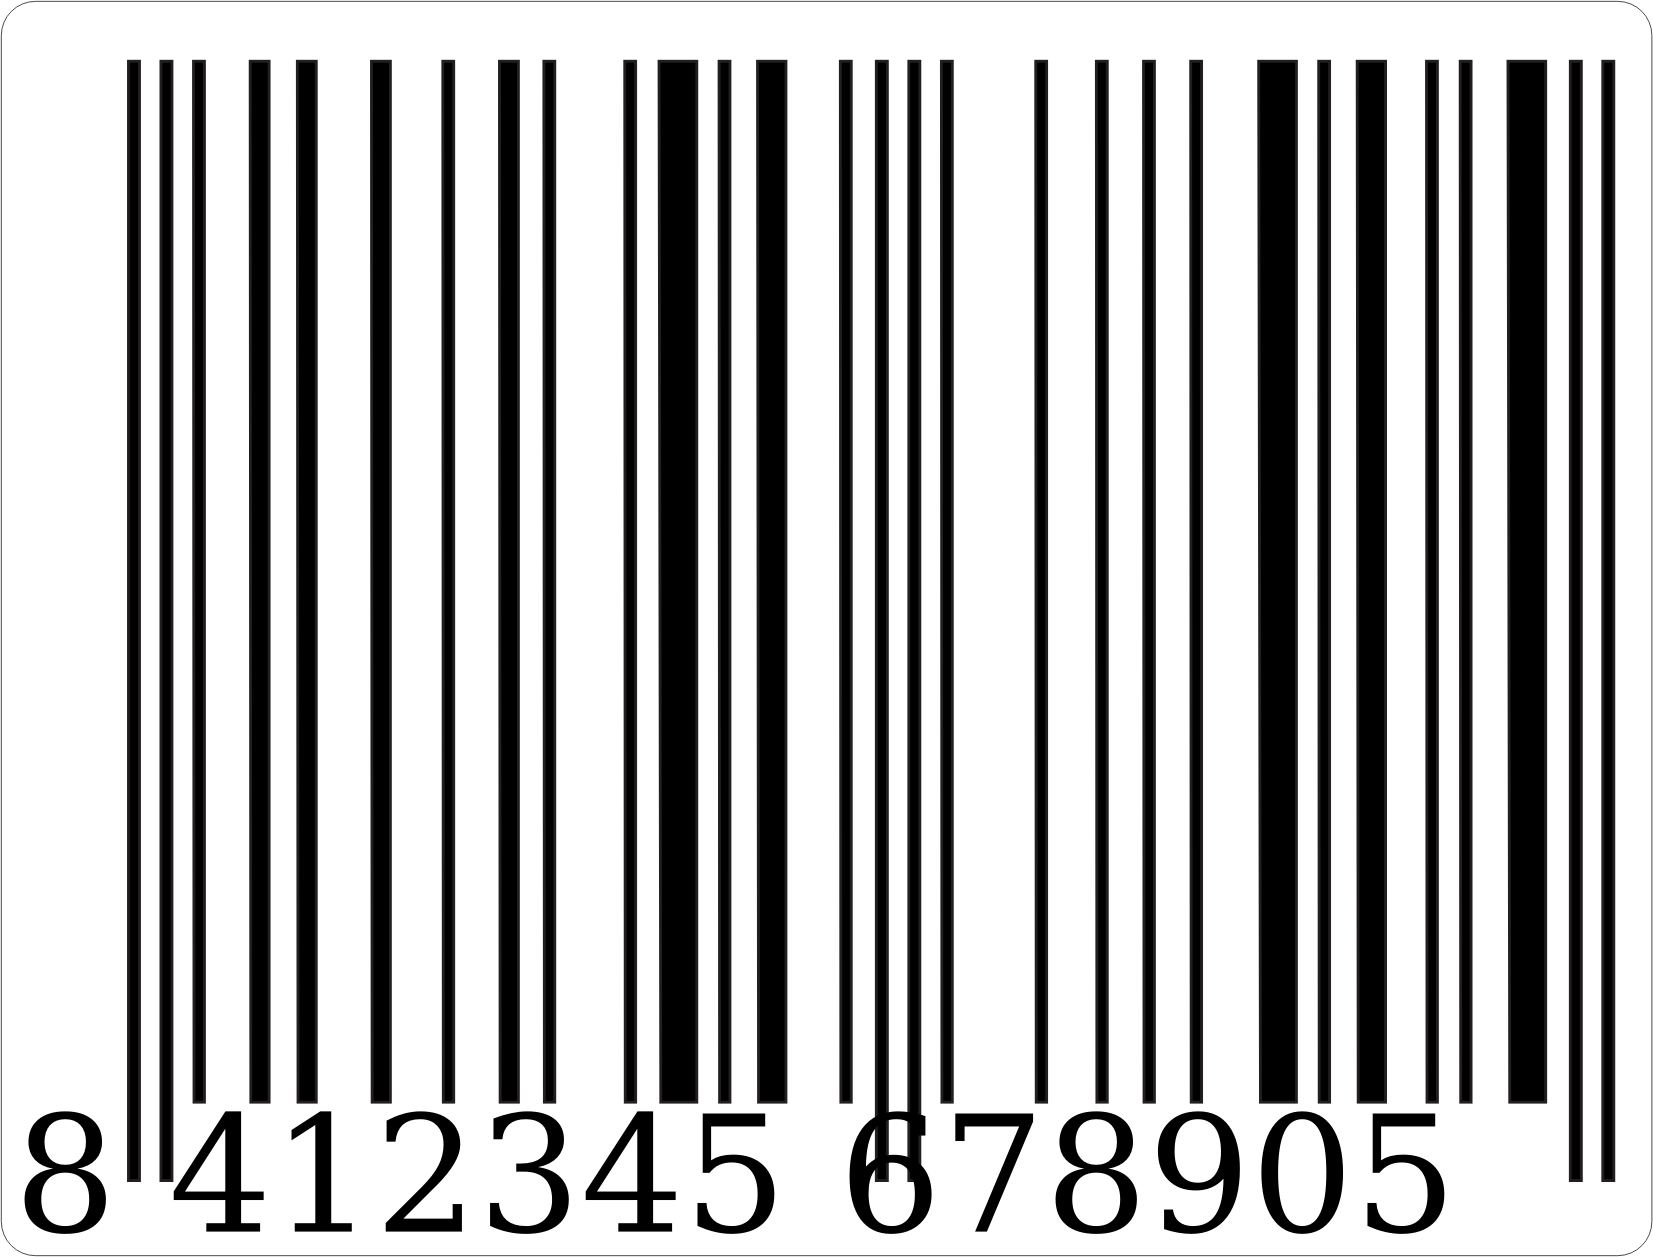 clipart of barcode - photo #30